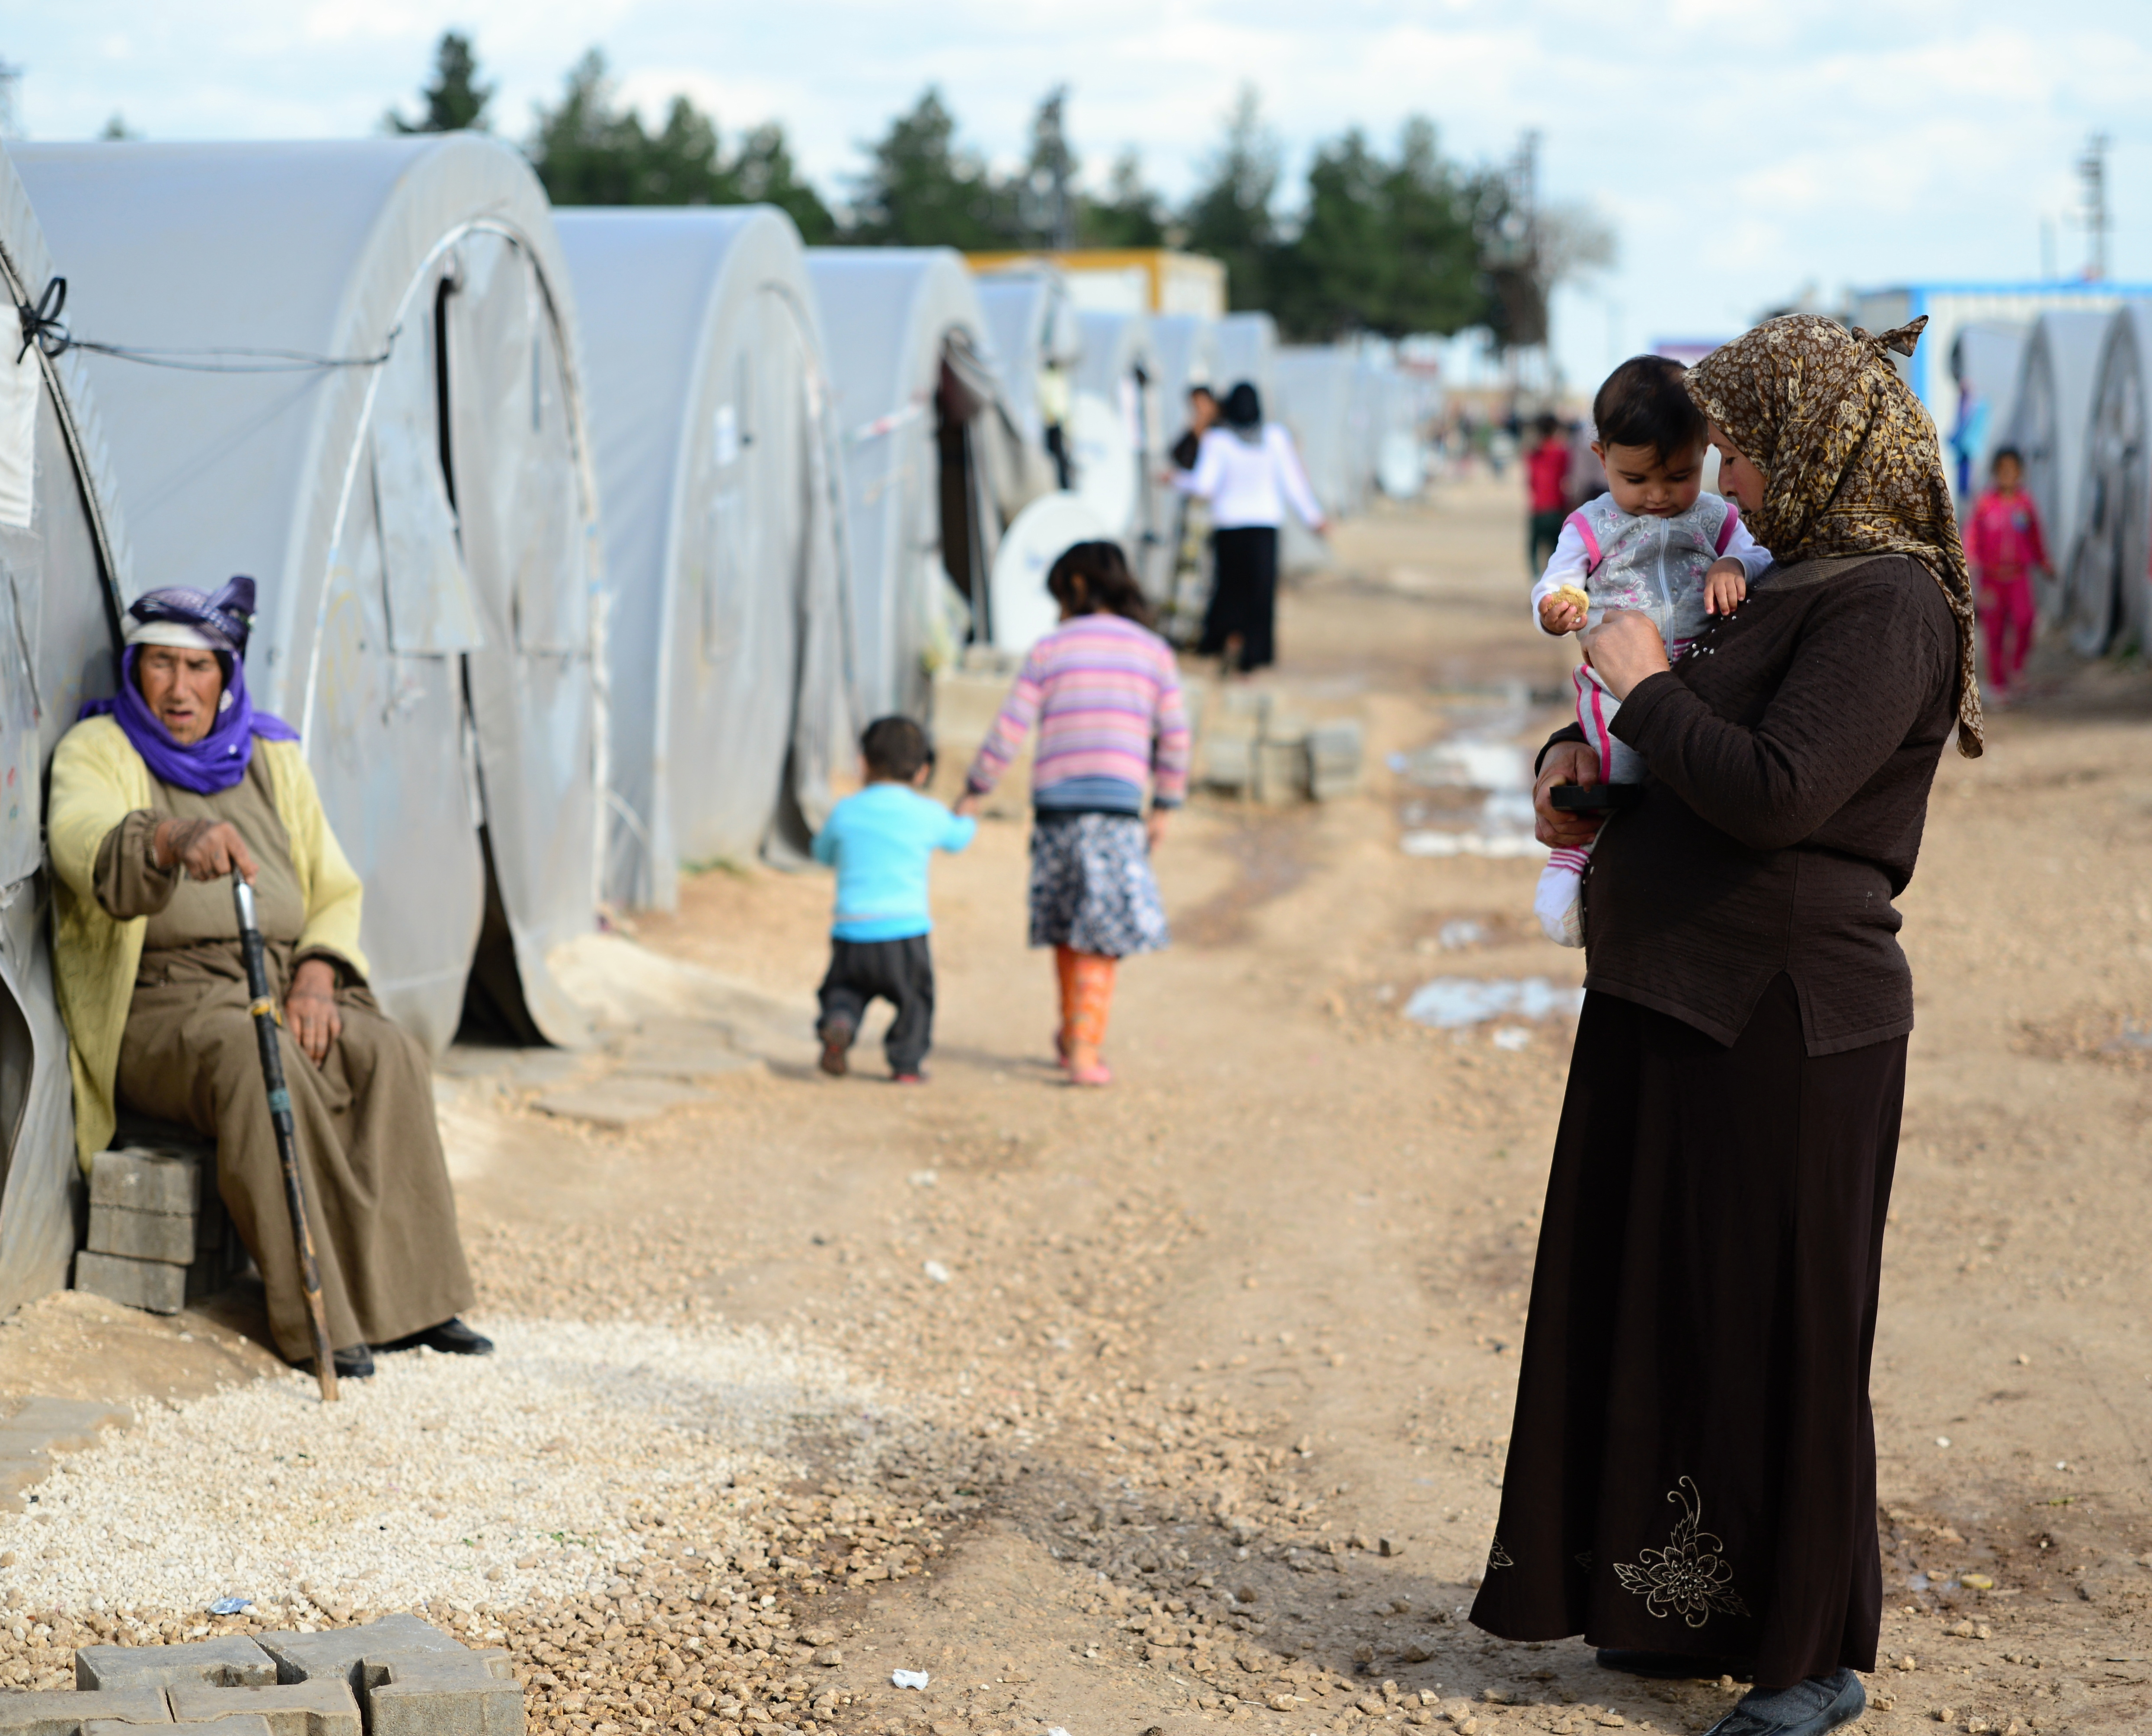 A woman stands holding her child at a Syrian refugee camp in Turkey.